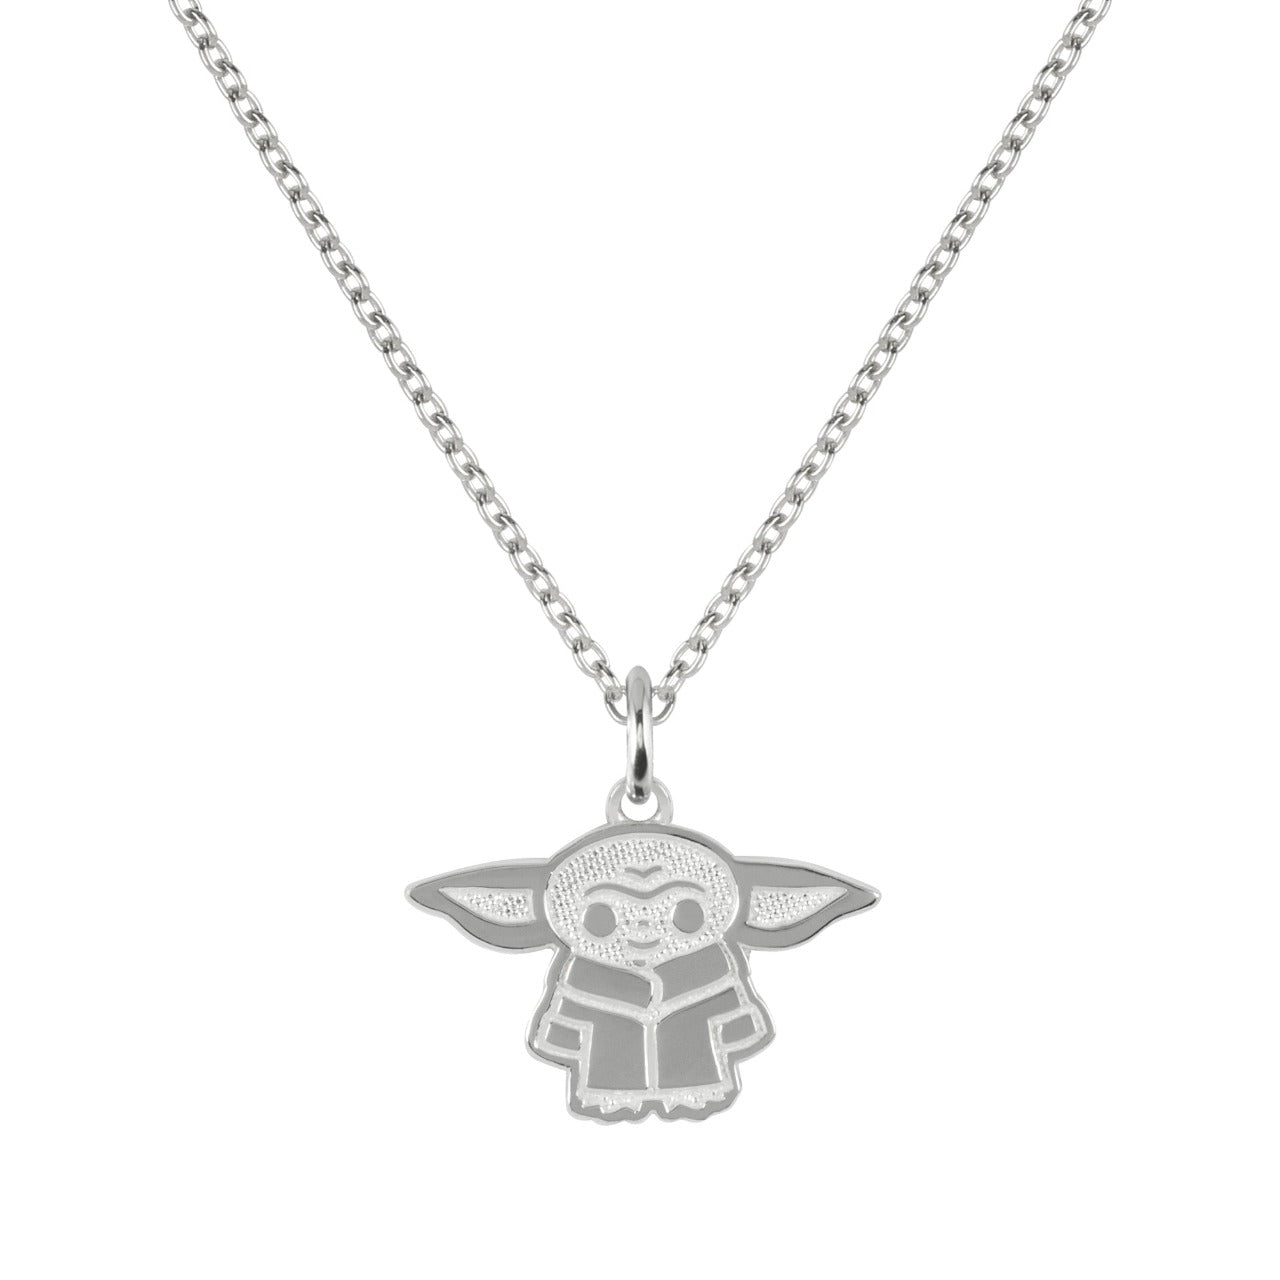 Disney Baby Yoda Sterling Silver Necklace  These exquisitely designed Baby Yoda Sterling Silver necklace, form a silhouette of Yoda's famous pose adding a touch of class and fun jewellery.  Trendy and fashionable design, the Disney Baby Yoda necklace adds a chic, fun touch to any outfit.